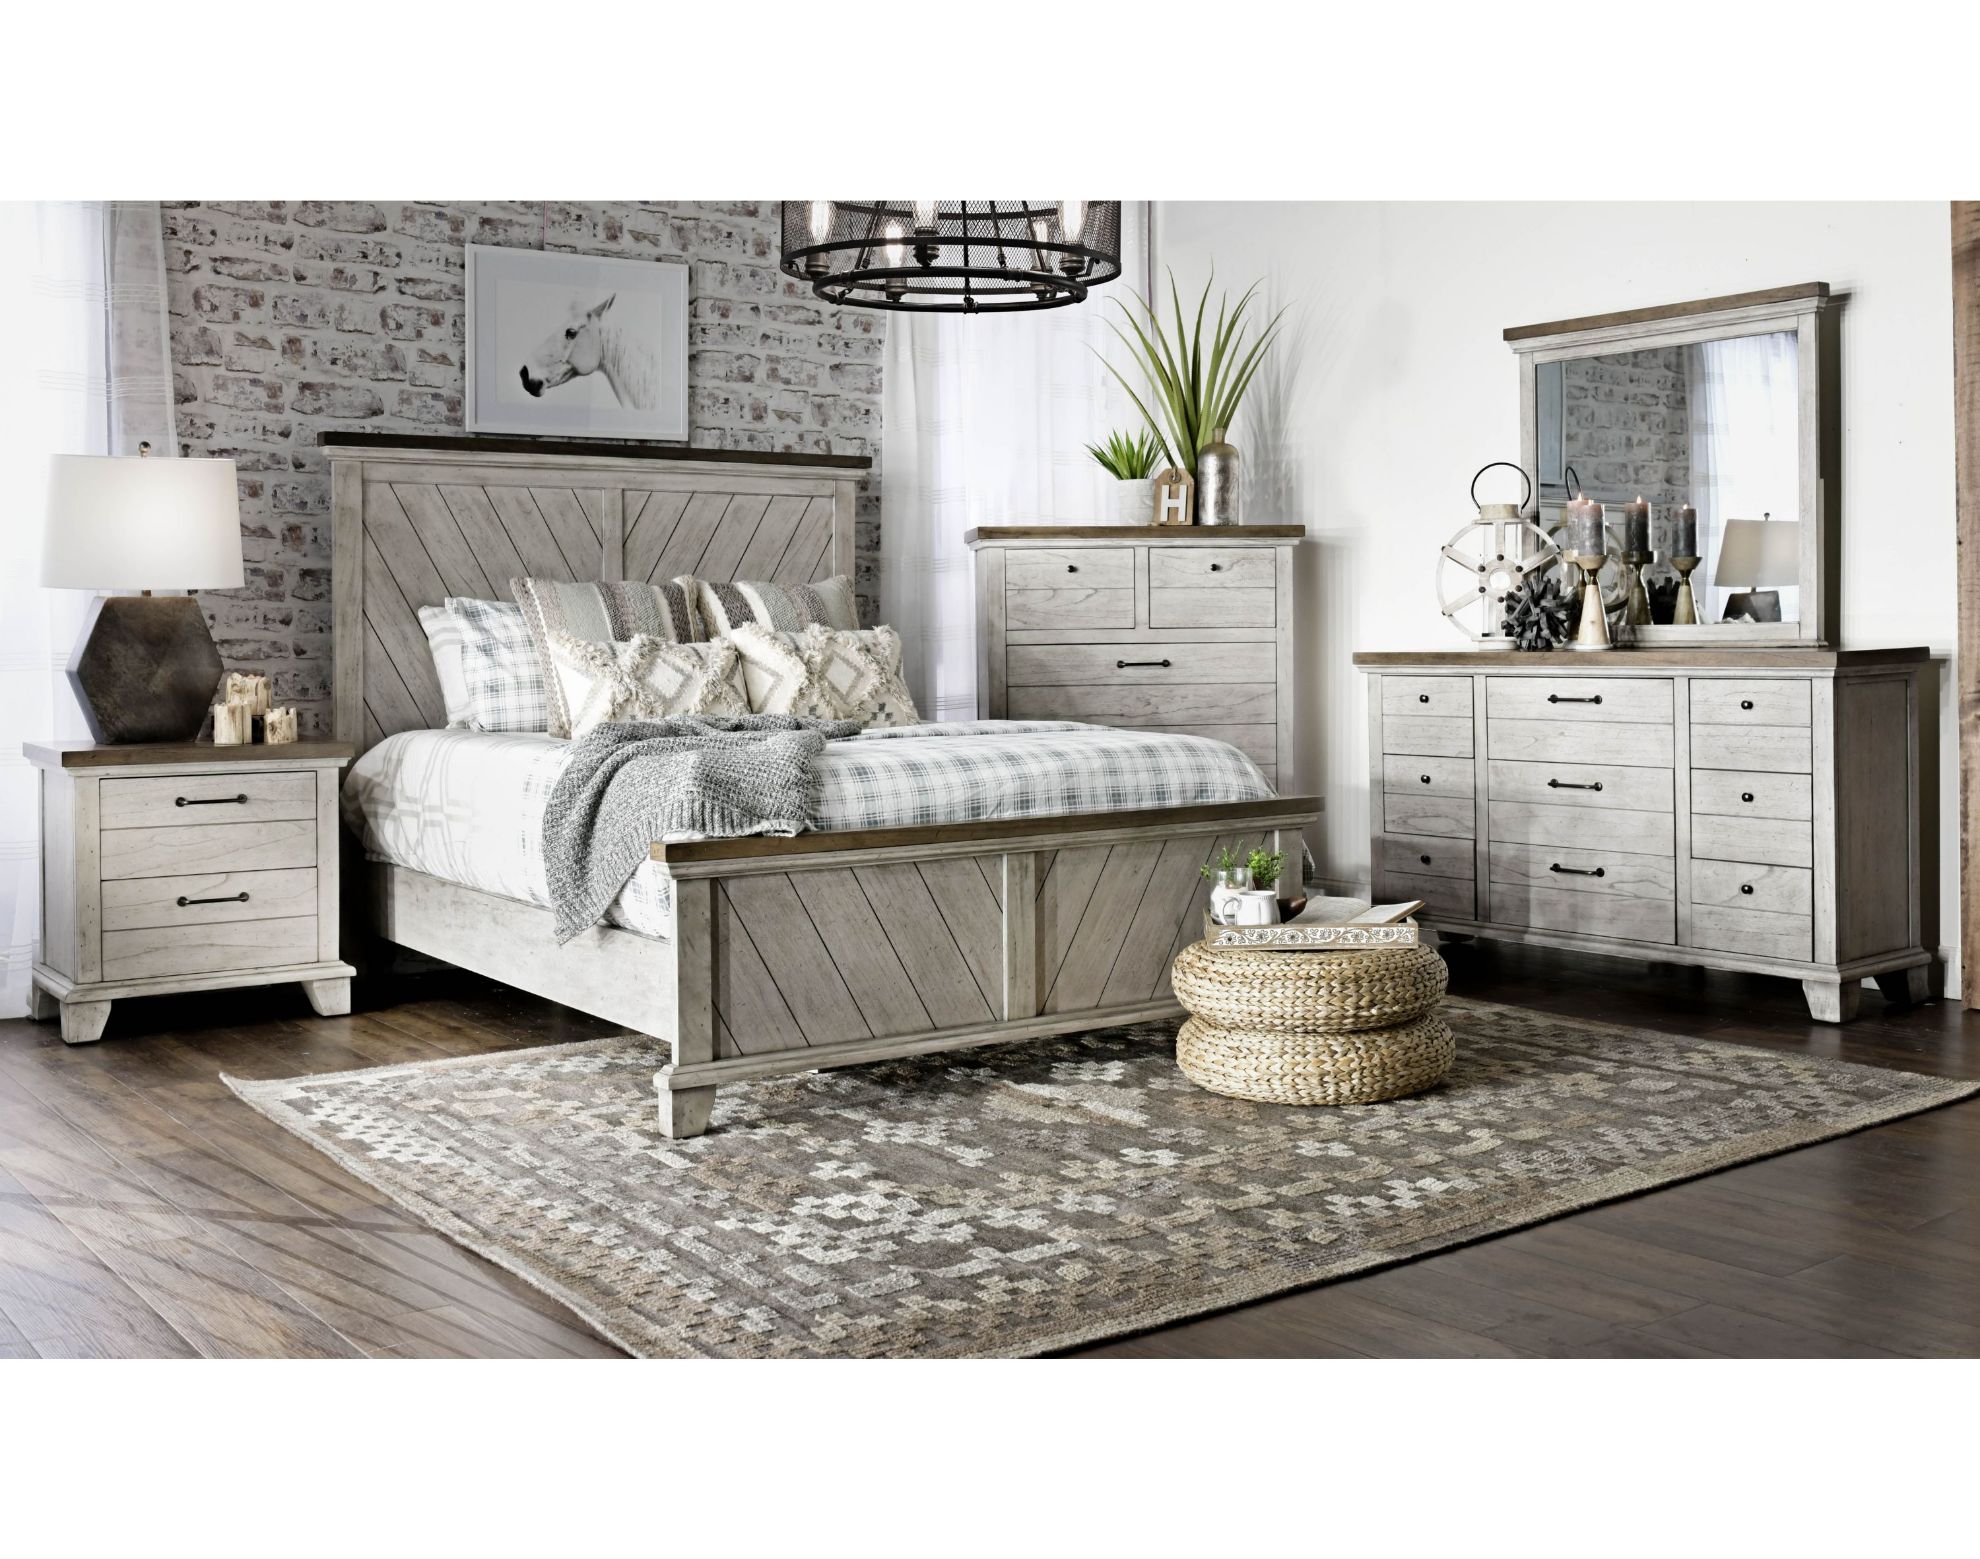 Bedroom Set with chest of drawer